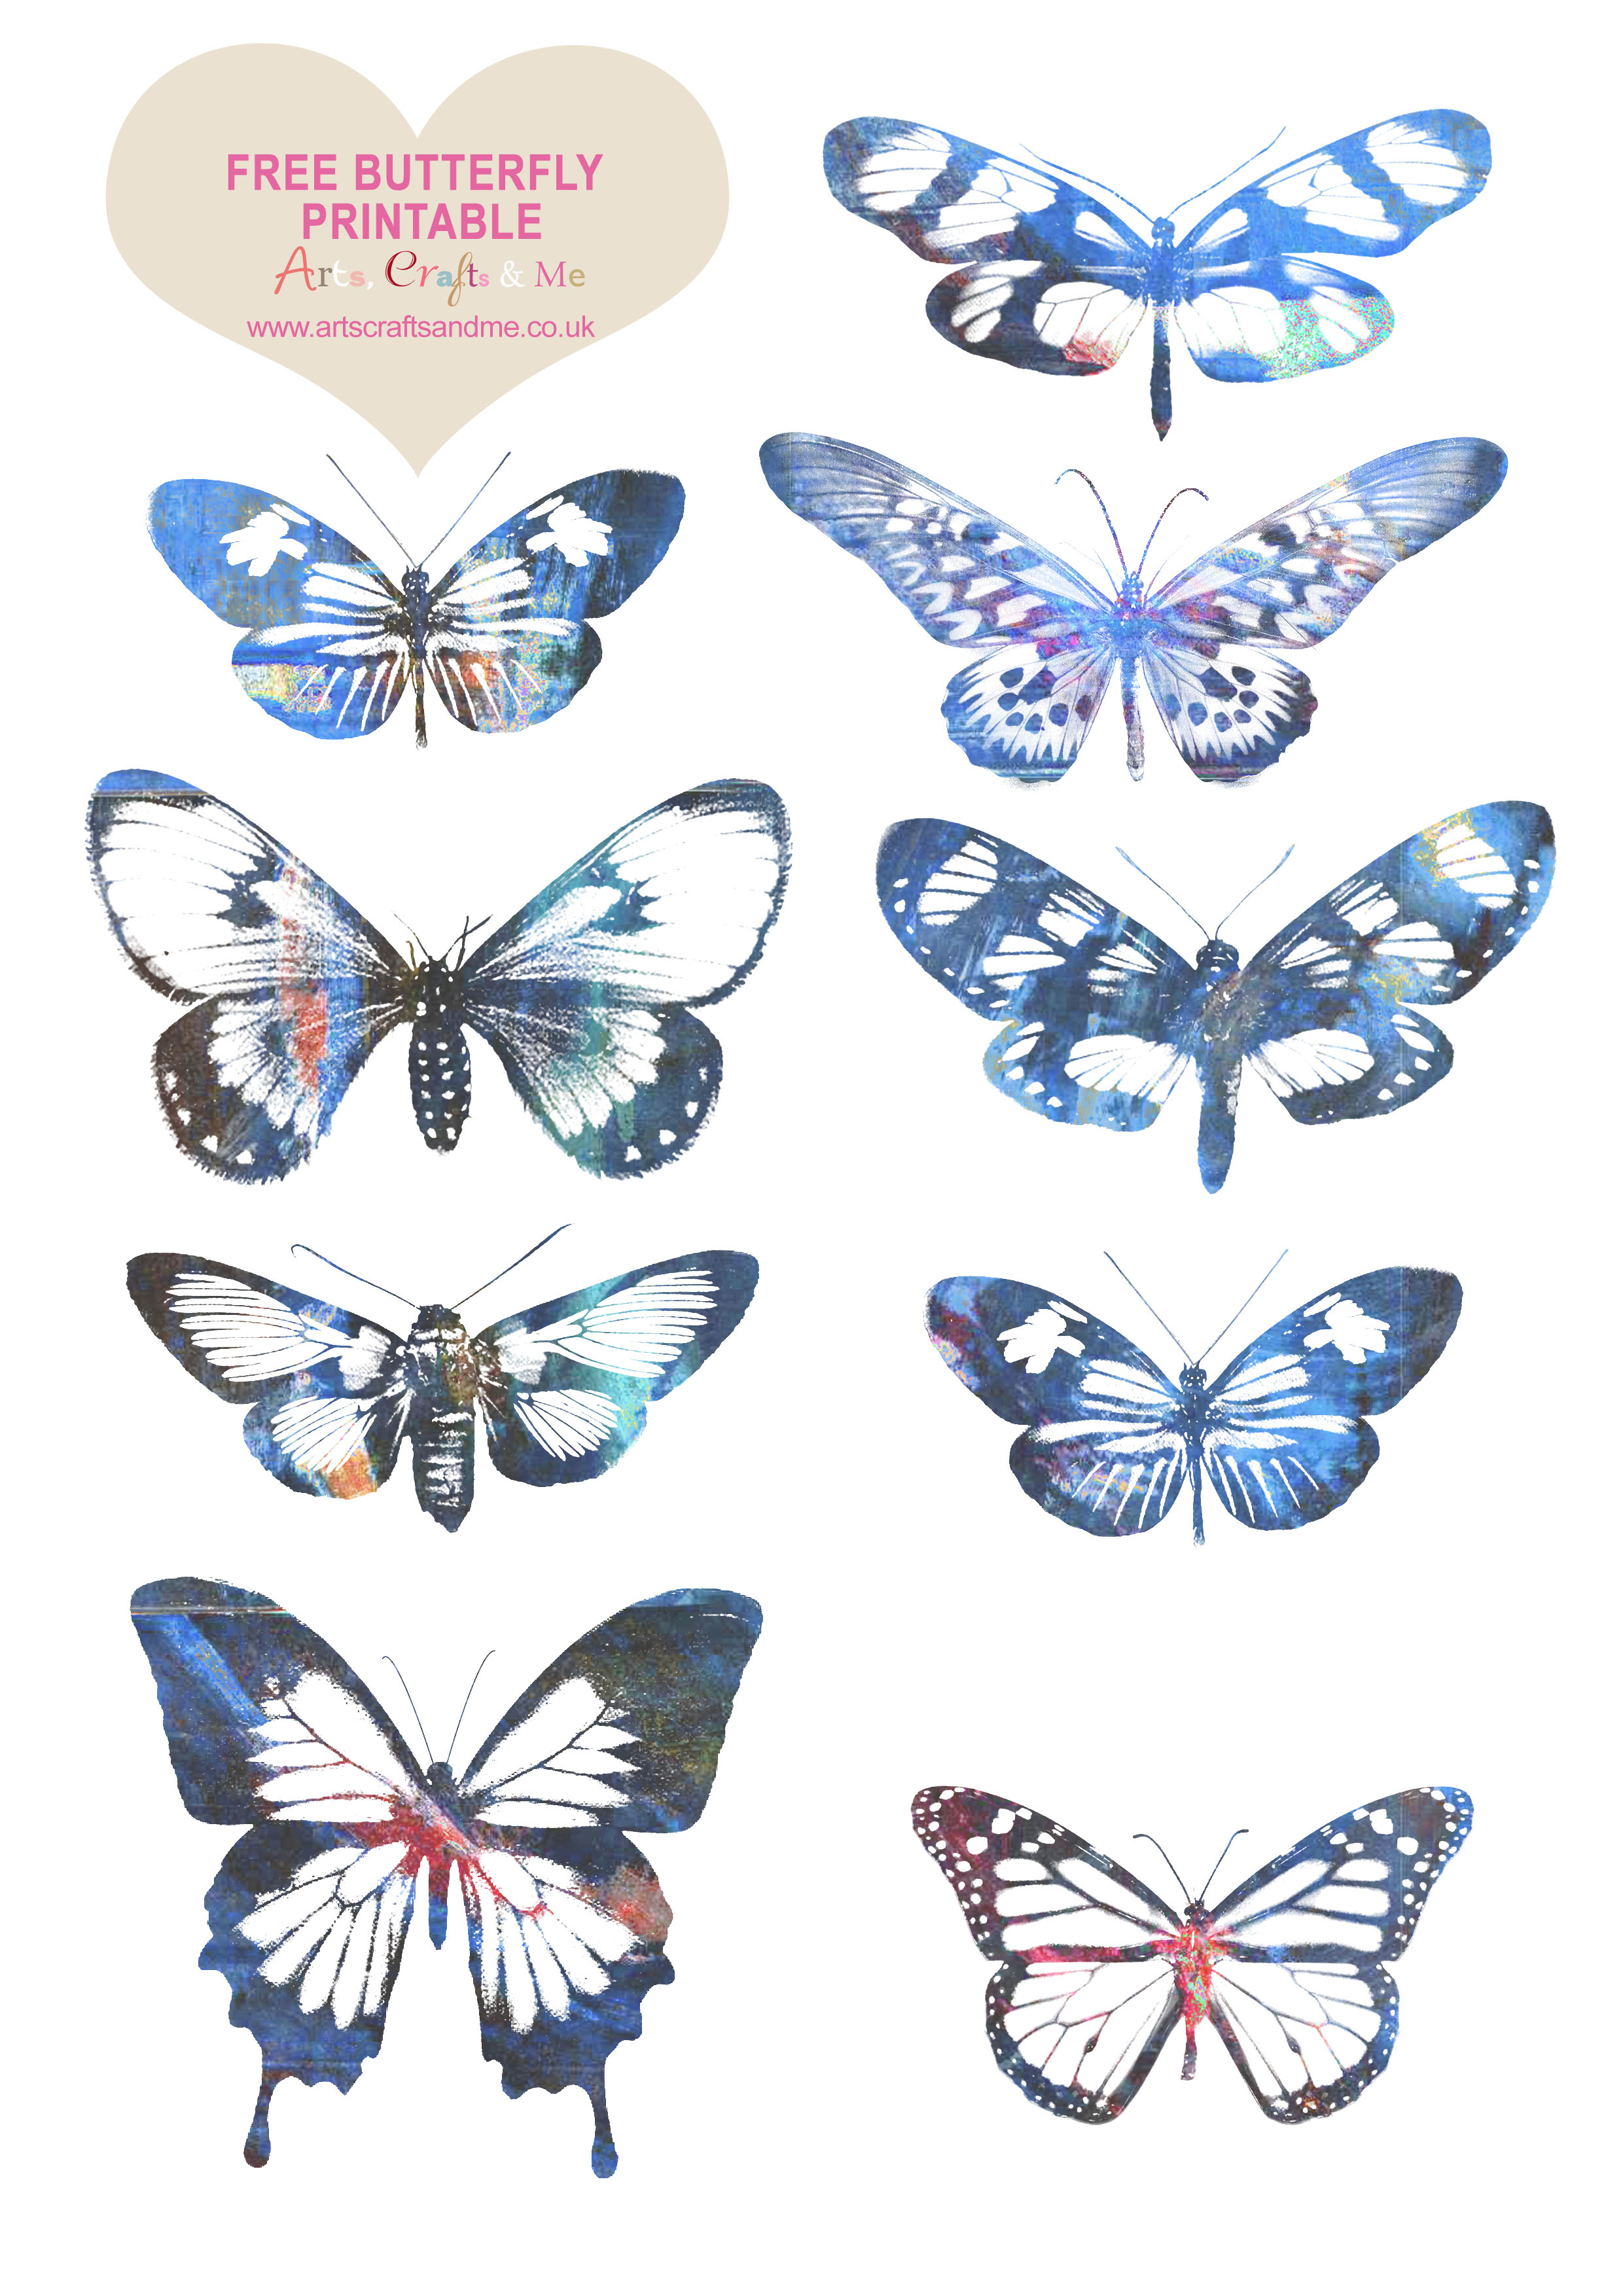 7 Best Images of Butterfly Prints Free Printables - Free Printable